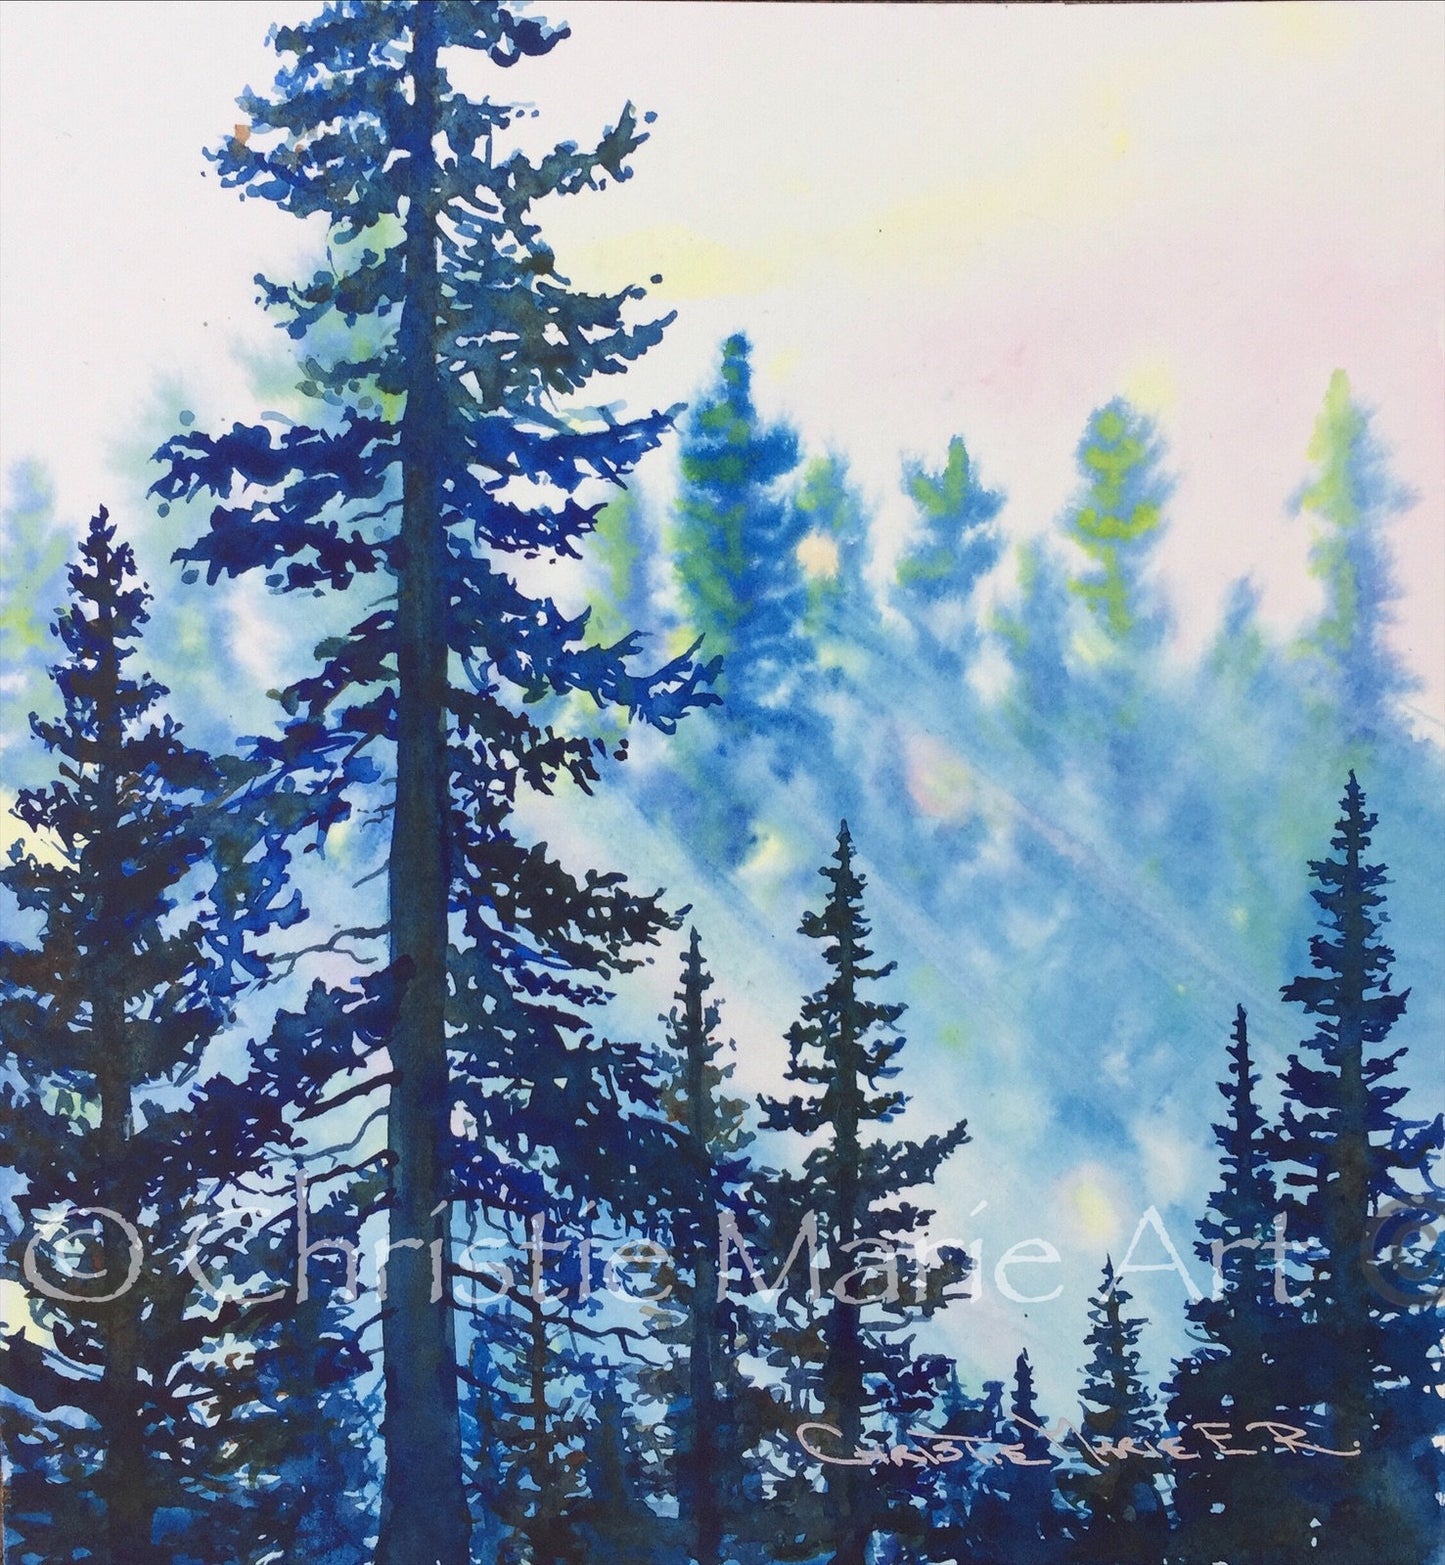 Original Watercolor Art "Forest Light" Framed, Tahoe style silhouetted forest pine trees by artist Christie Marie Elder Russell ©